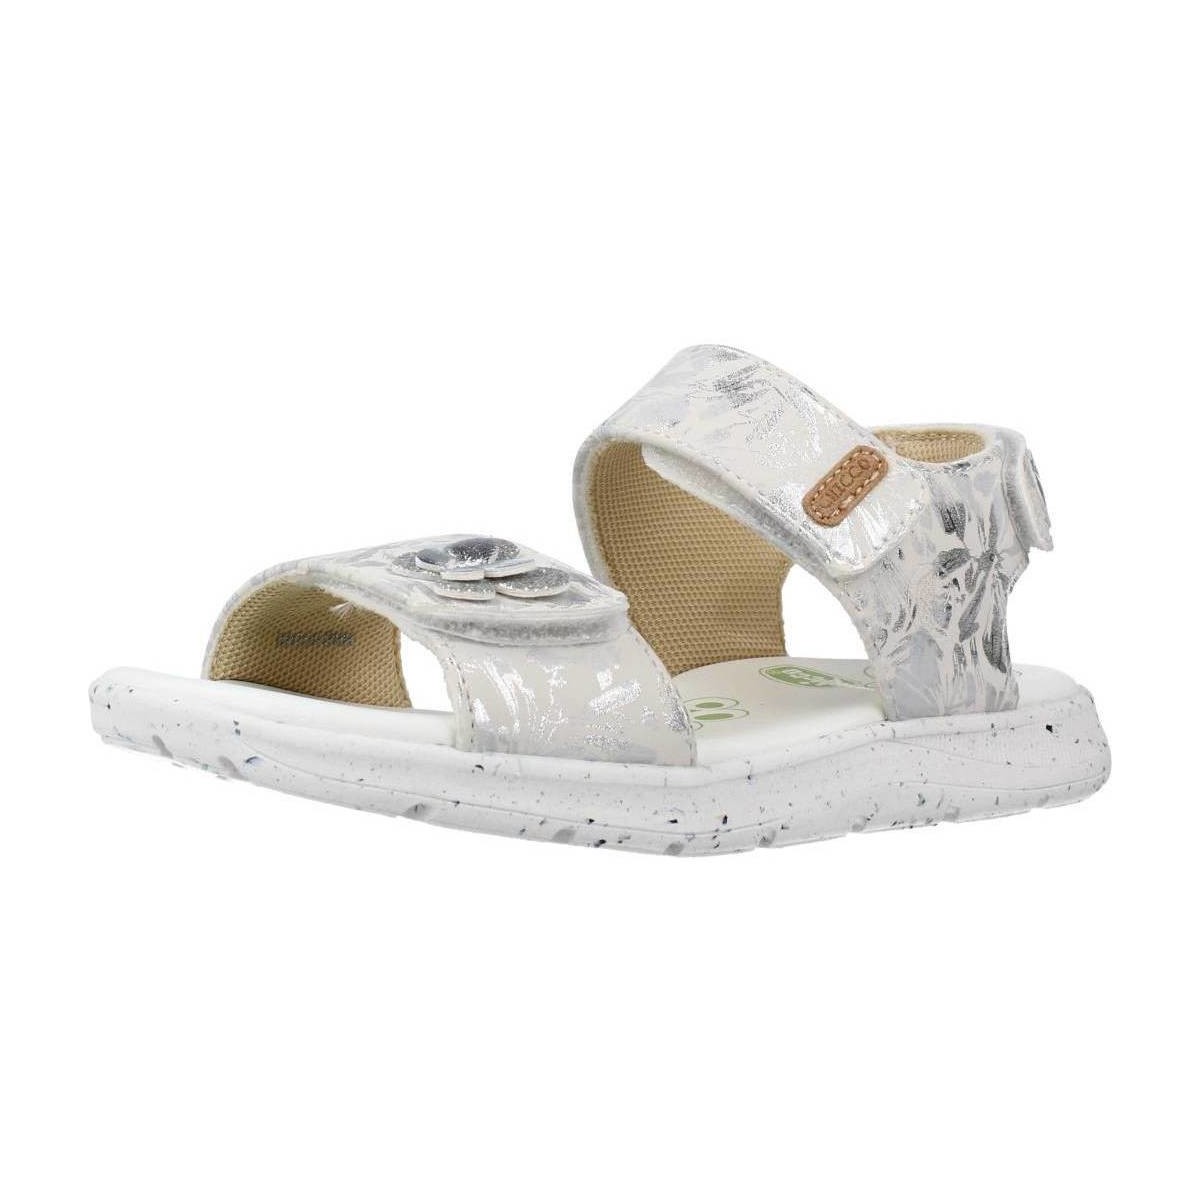 Chaussures Fille Sandales et Nu-pieds Chicco COSTANCE Blanc